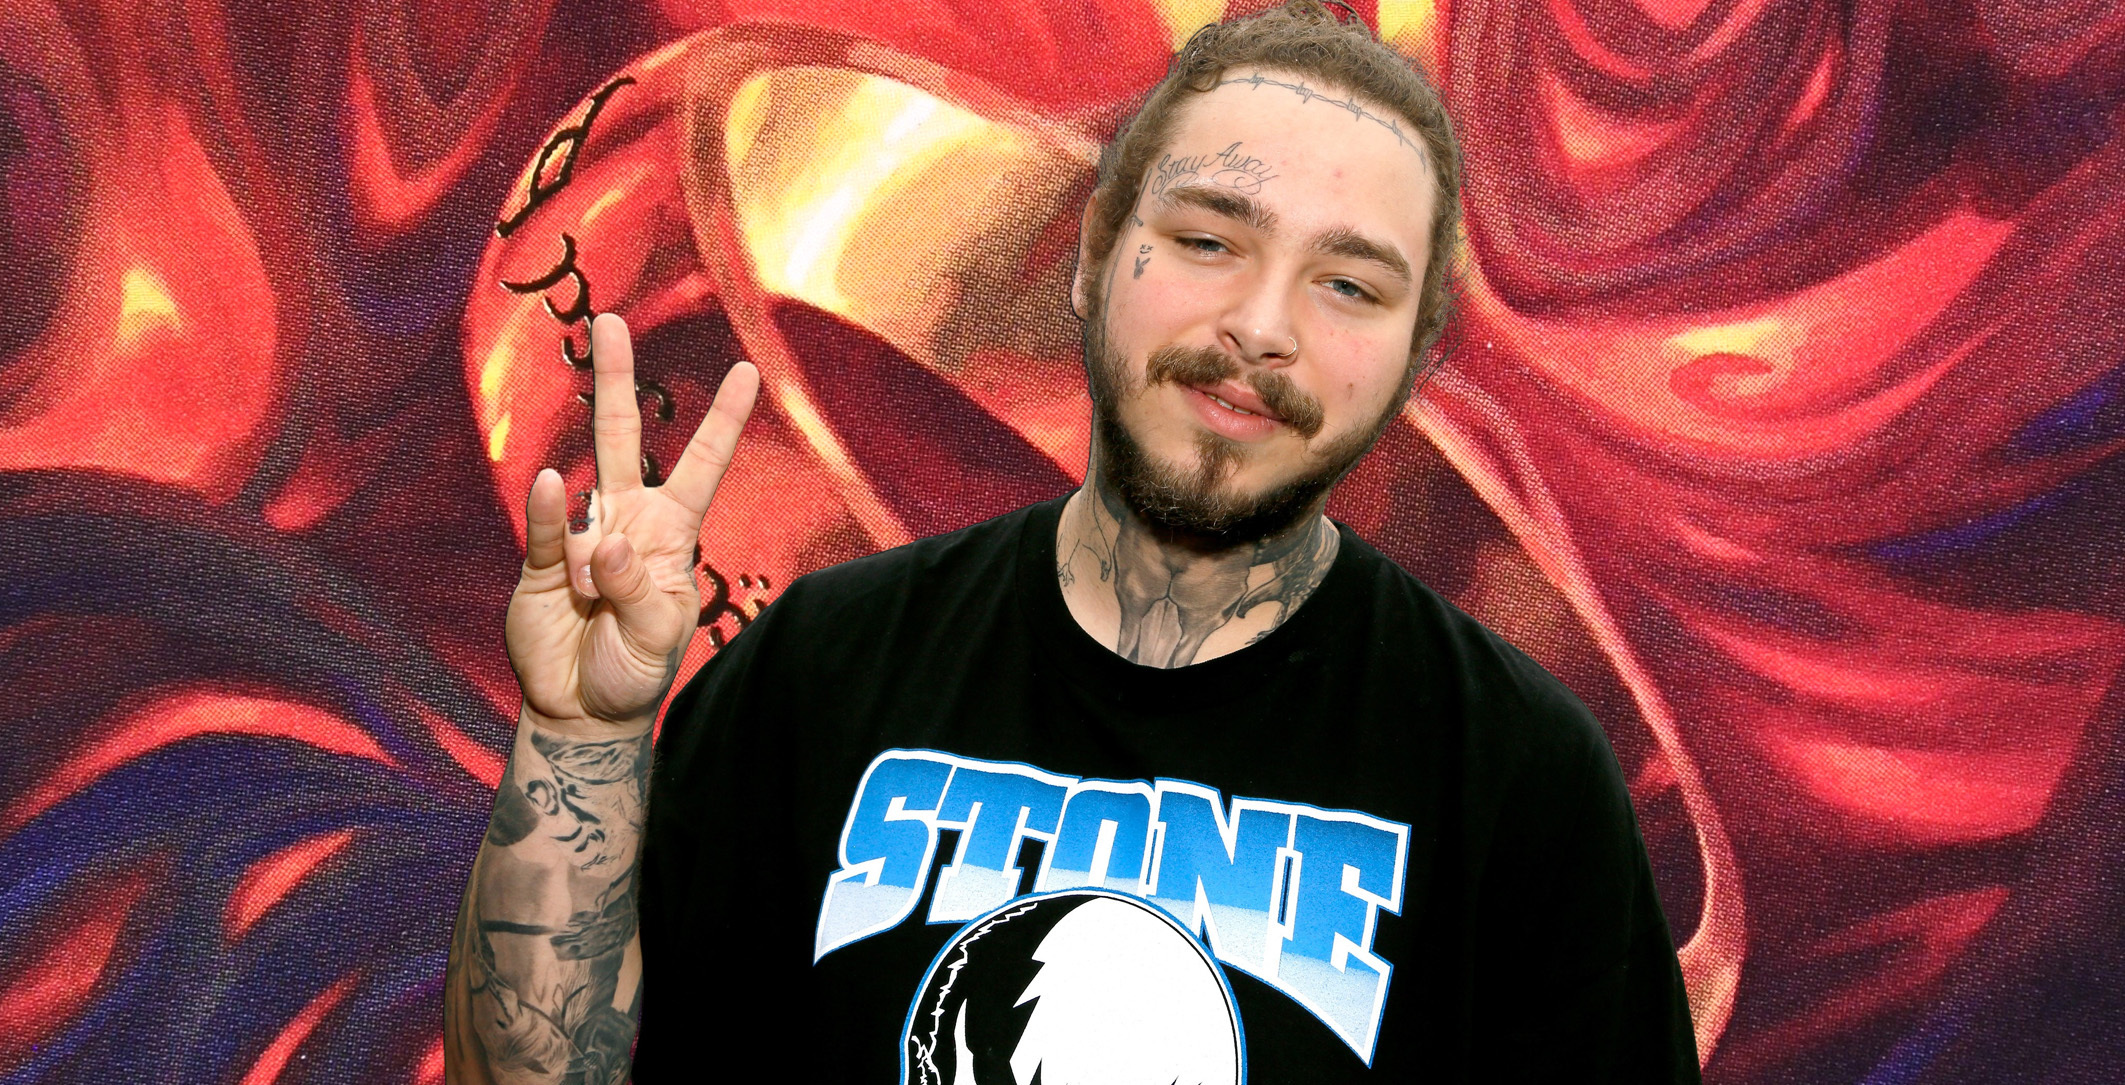 Post Malone looks happy and makes a peace sign, superimposed on a detail of the illustration of the One Ring card, showing a golden ring